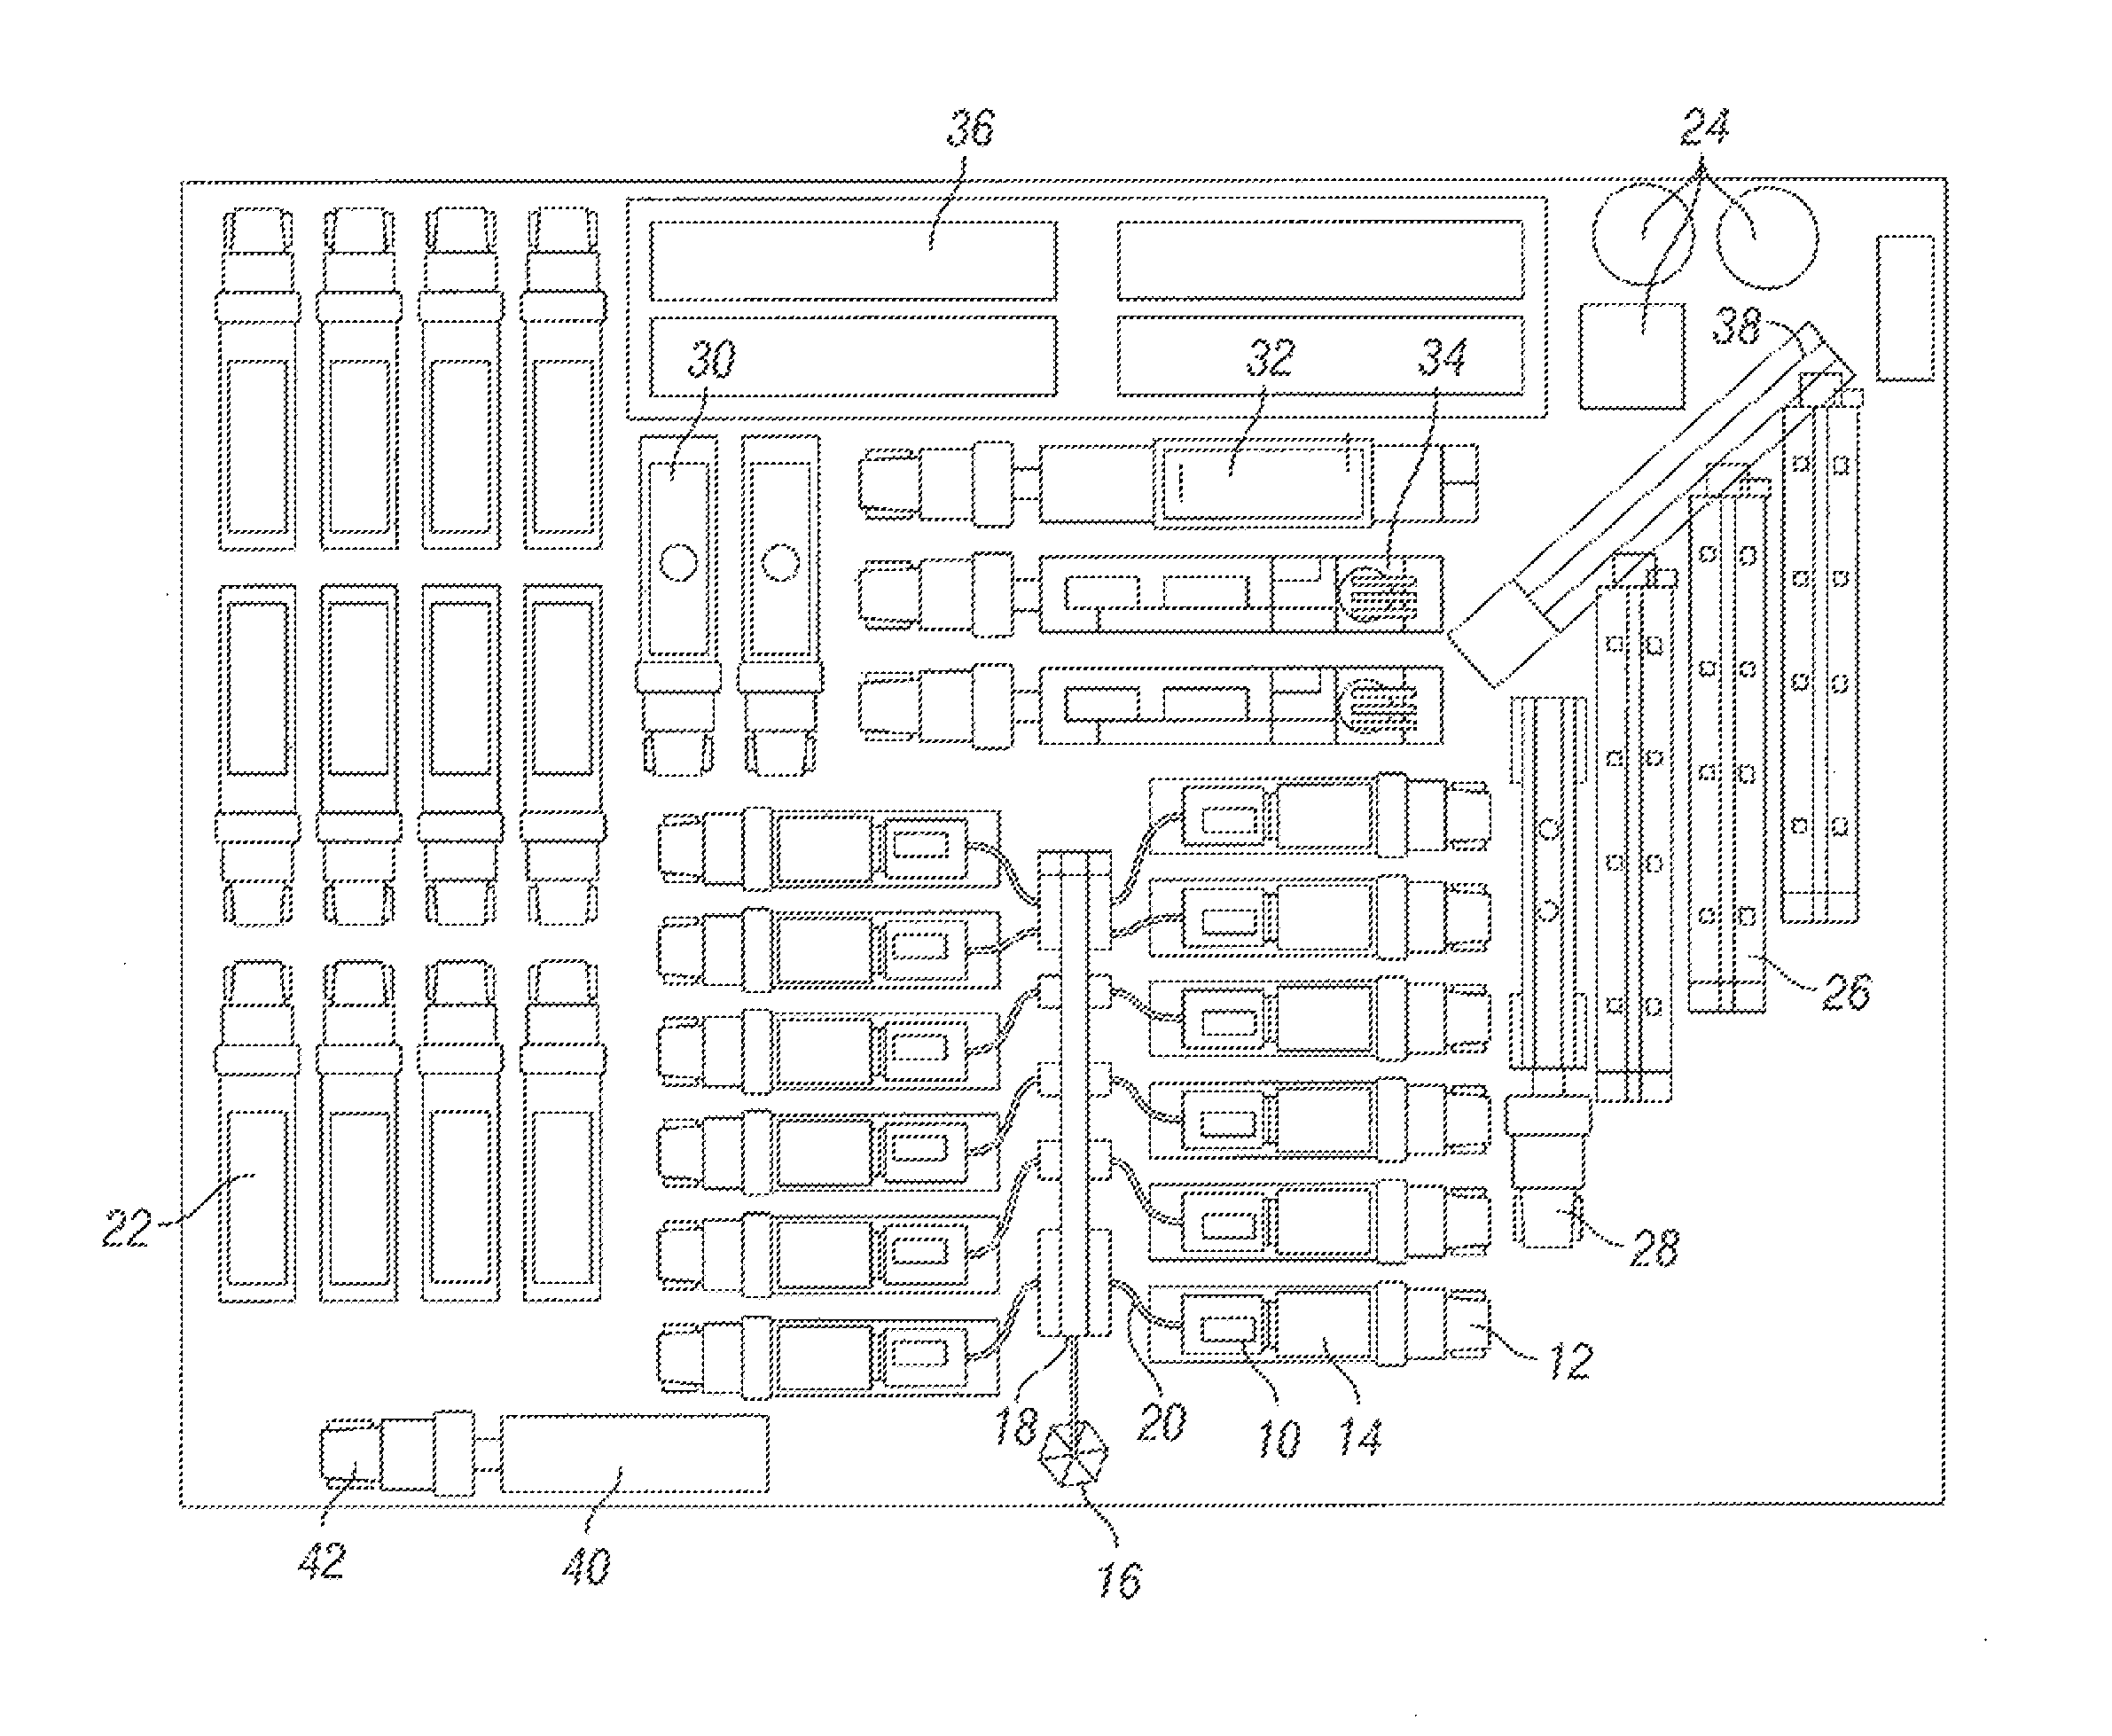 System for pumping hydraulic fracturing fluid using electric pumps